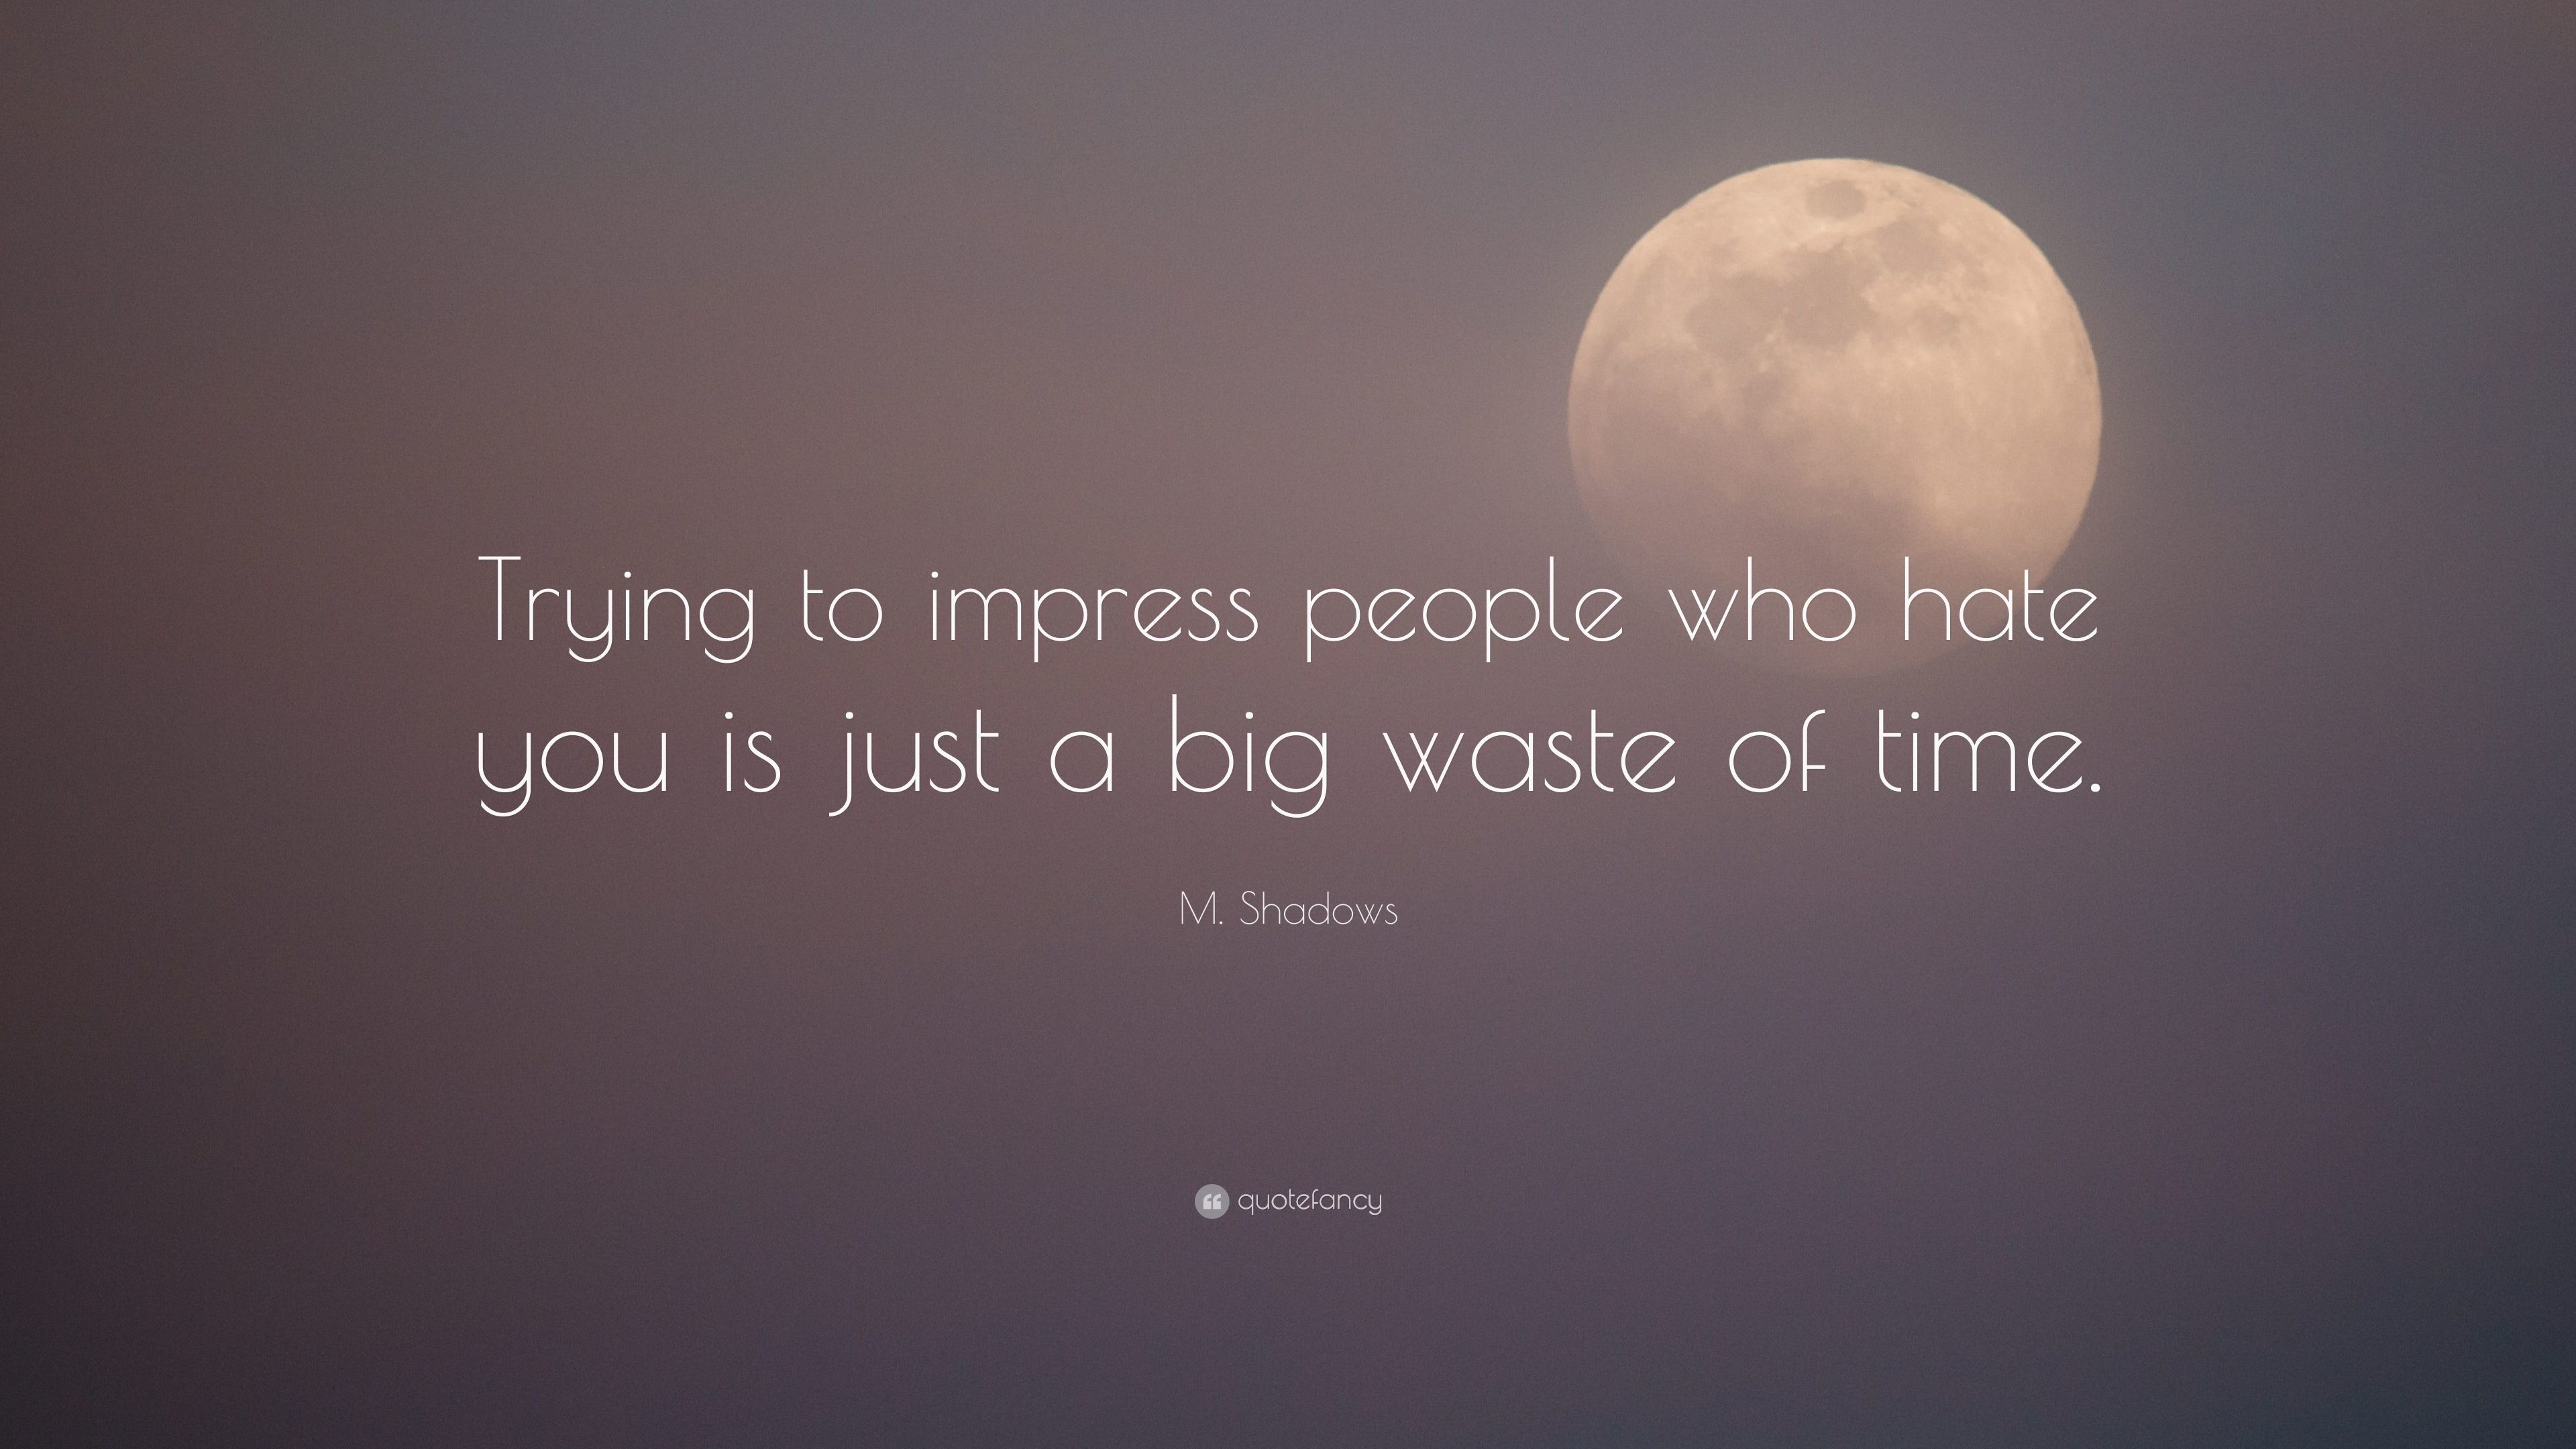 3840x2160 M. Shadows Quote: “Trying to impress people who hate you is just a